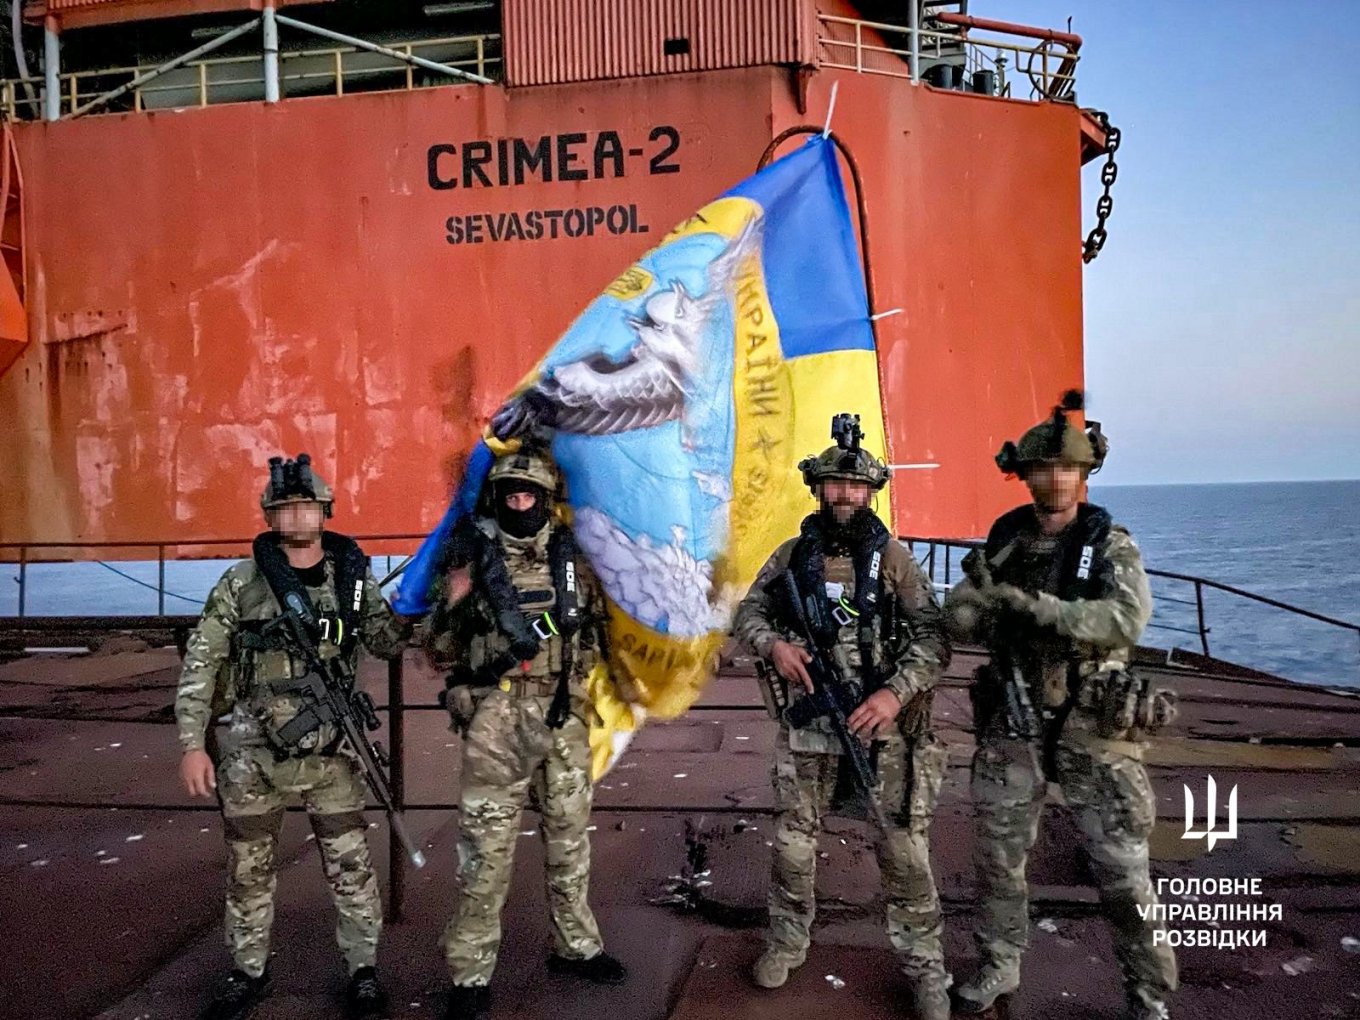 The russians may attempt to recapture what was lost, but Ukrainian special forces are prepared for such a scenario Defense Express Defense Express’ Weekly Review: What Is Happening With russian Navy